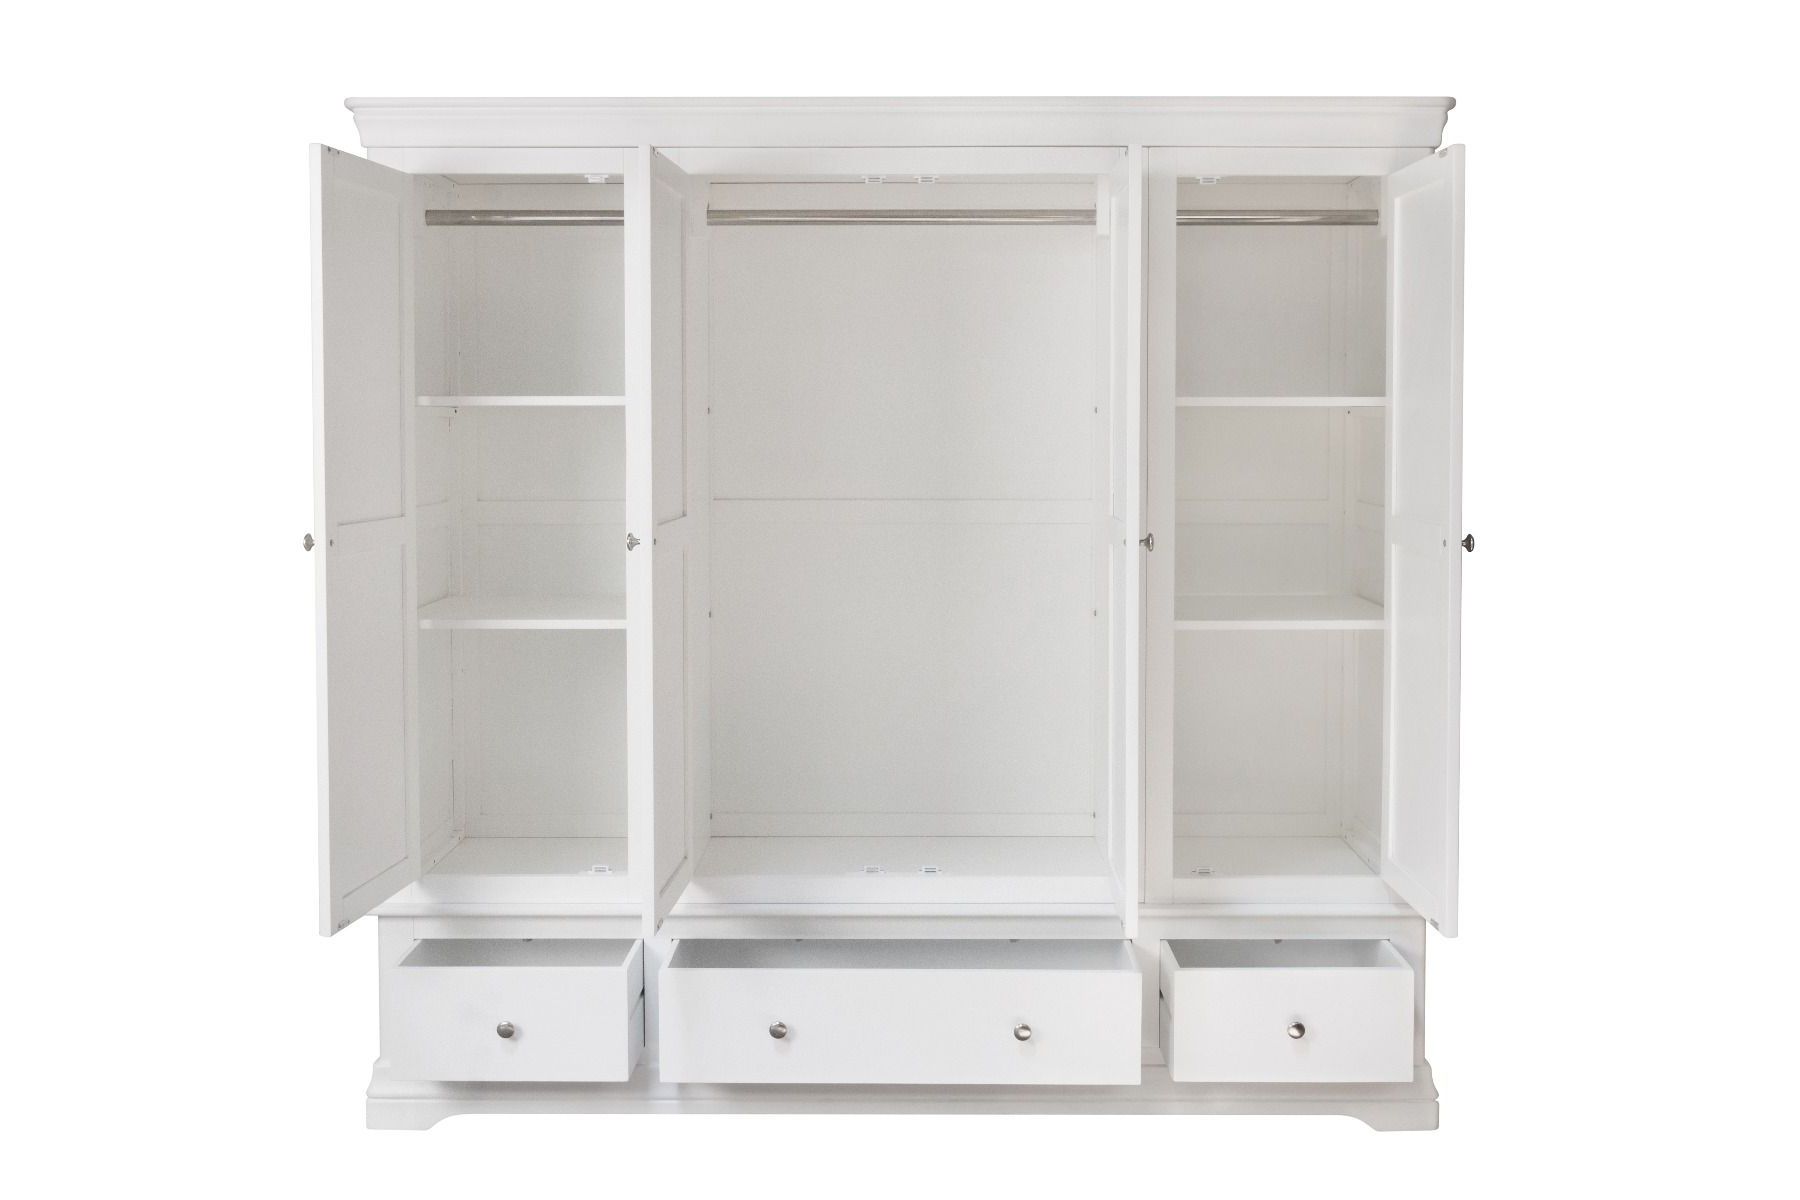 Toulouse White Painted 4 Door Quad Extra Large Wardrobe – Free Delivery |  Top Furniture Throughout Cheap 4 Door Wardrobes (Gallery 5 of 20)